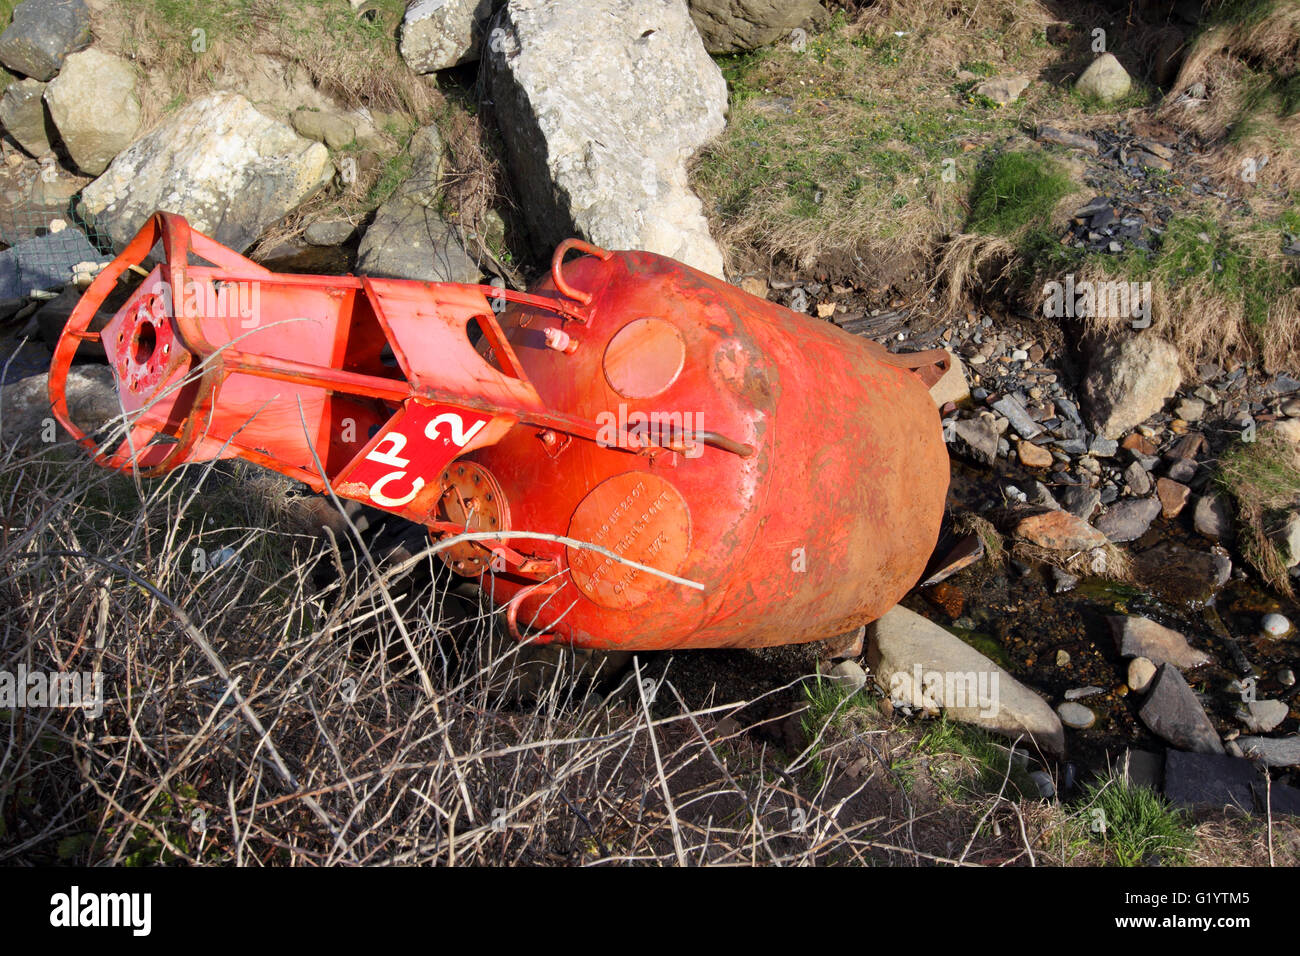 Department of transport buoy no NF2507 Canada, on a beach in Wales Stock Photo